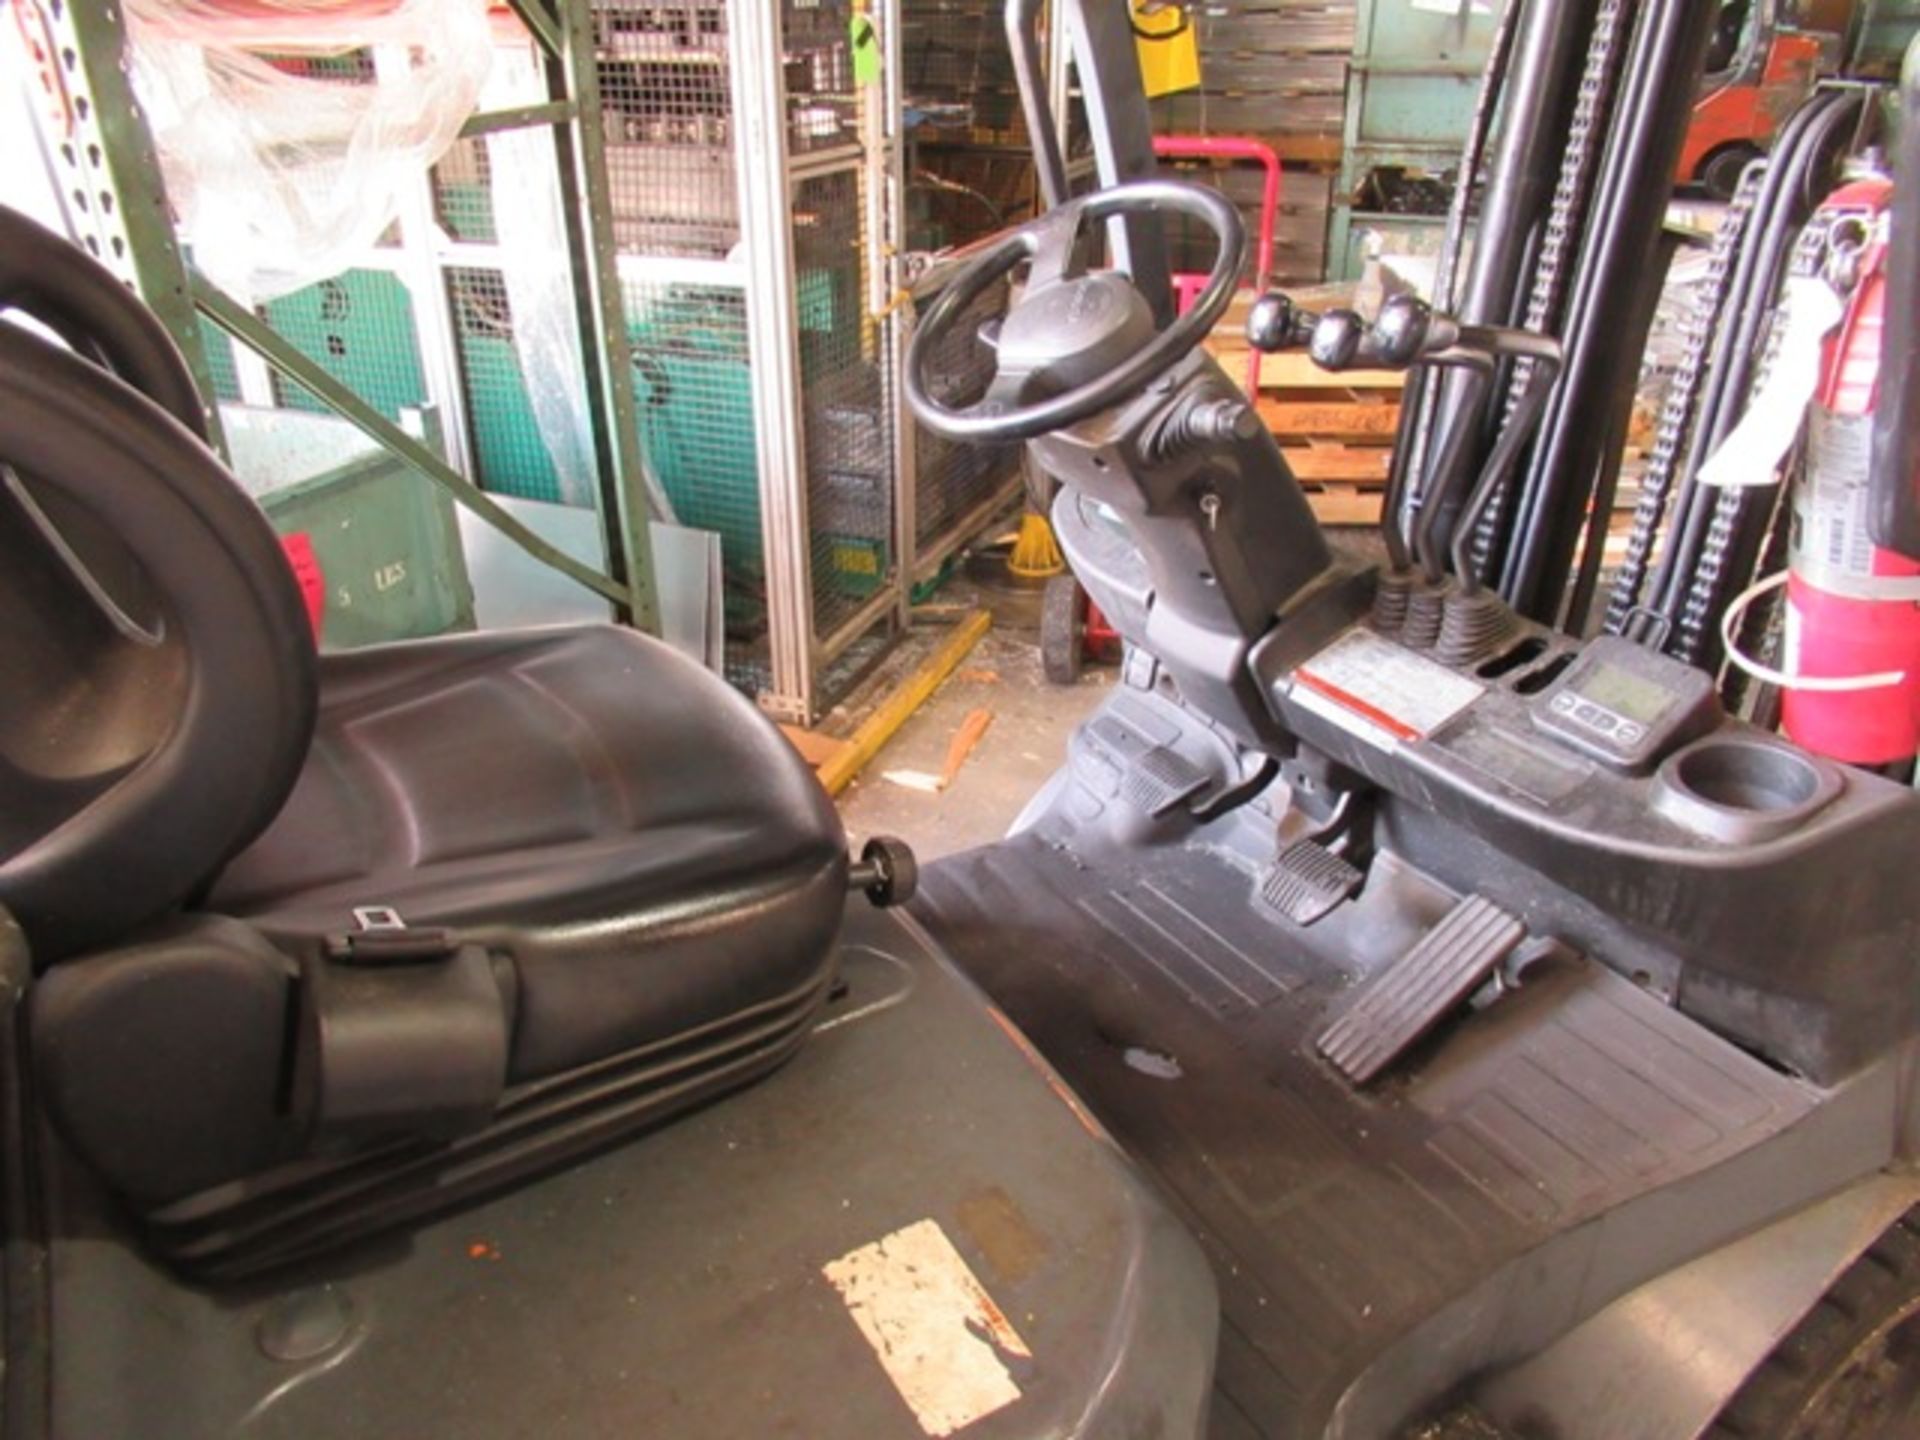 TOYOTA 8F9CU25 PROPANE FORKLIFT, 4,400# CAP., 3 STAGE W/SIDE SHIFT, SN 25435, NO TANK - Image 2 of 3